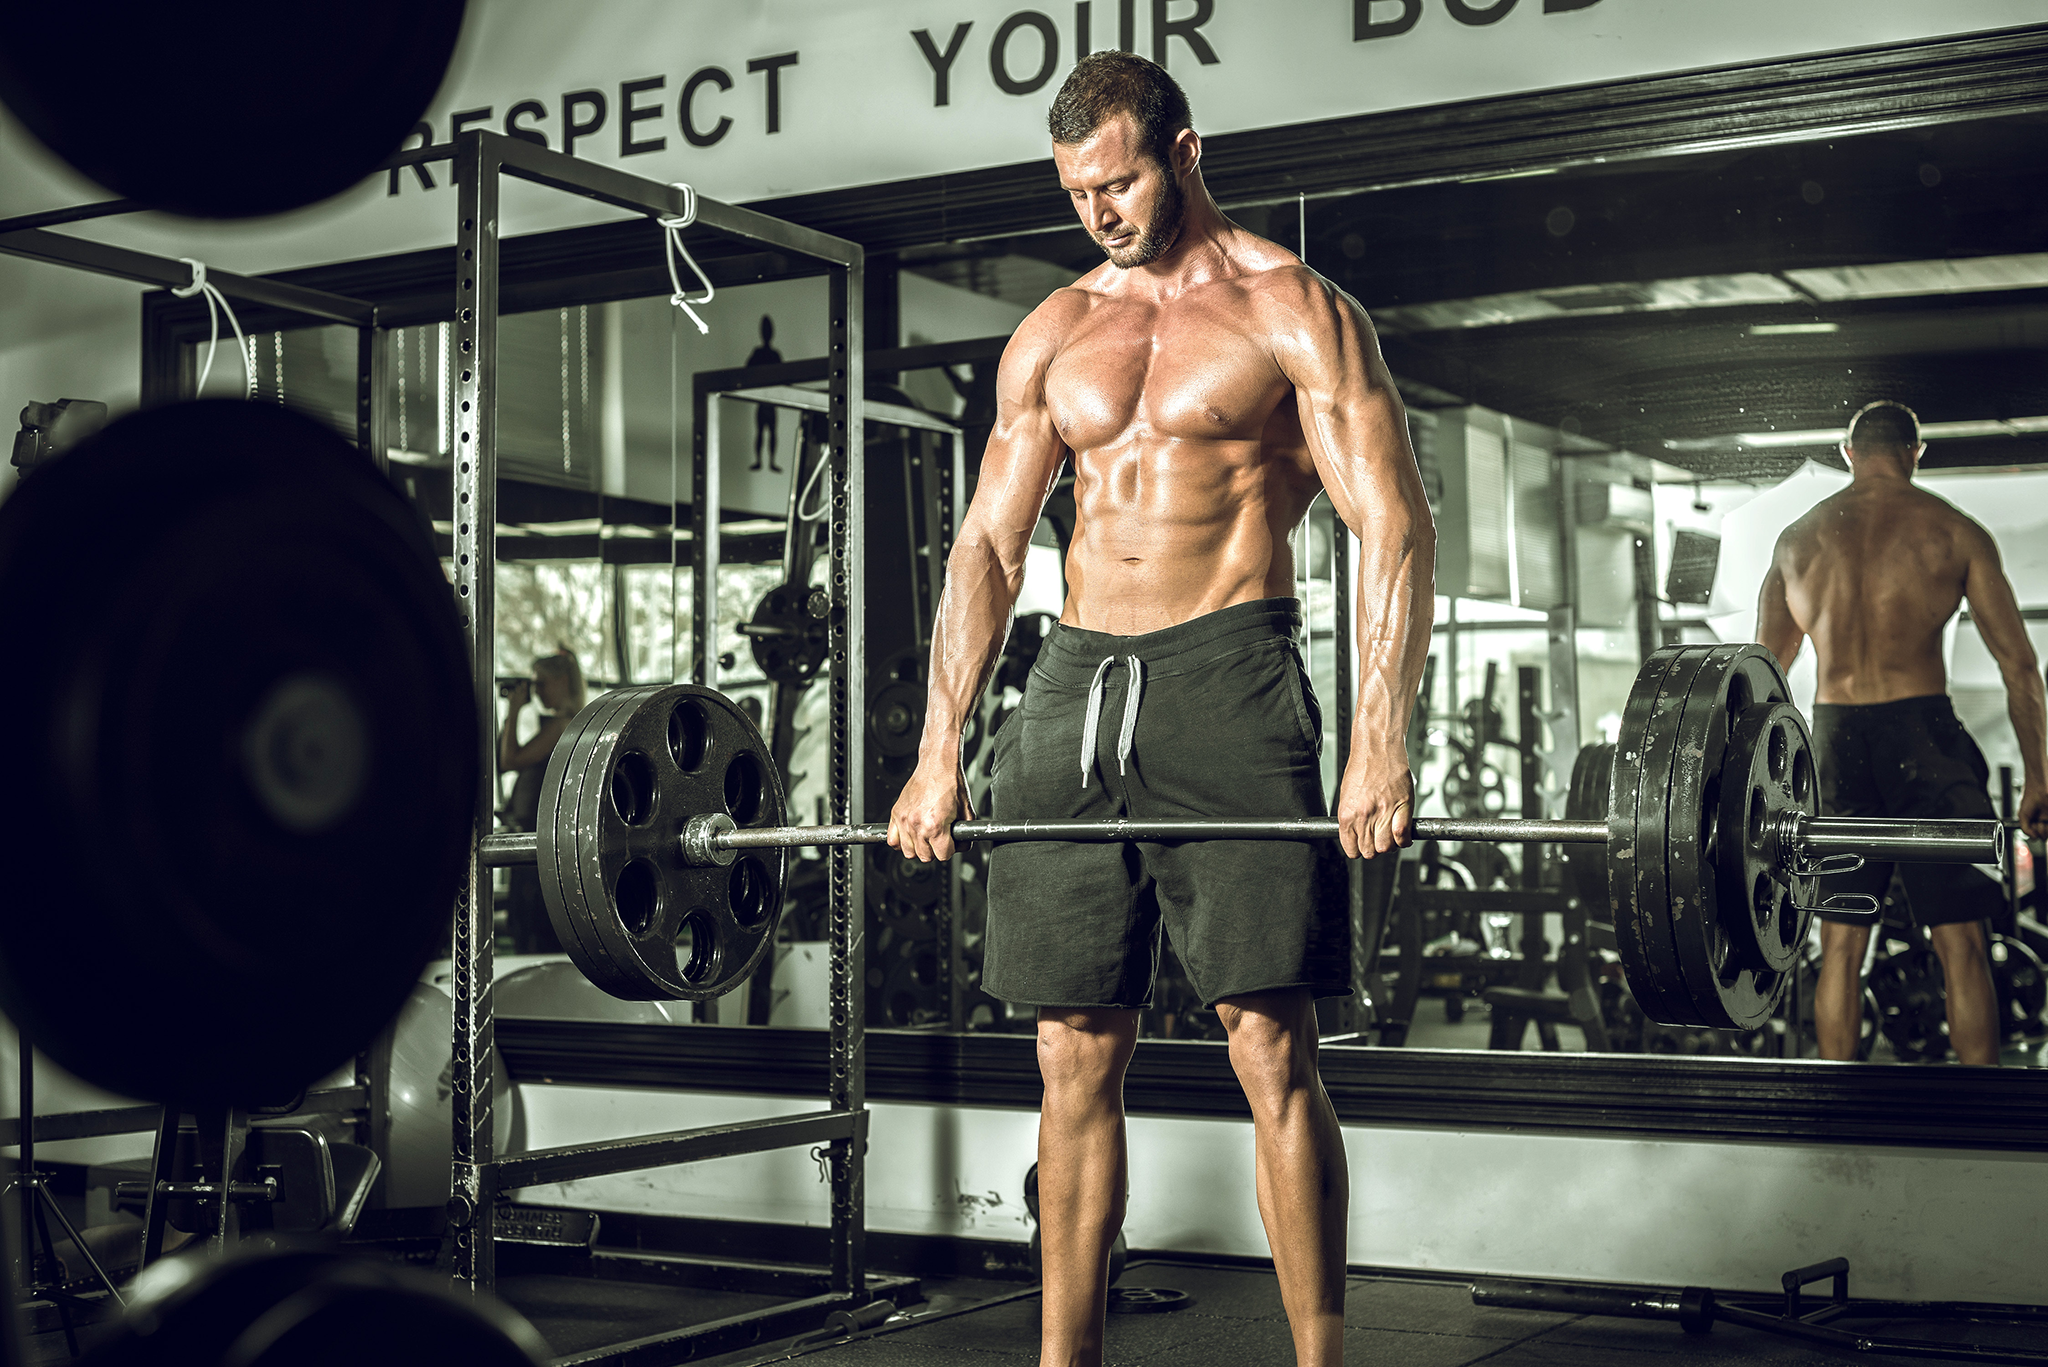 Six Tips To Explosive New Pectoral Growth